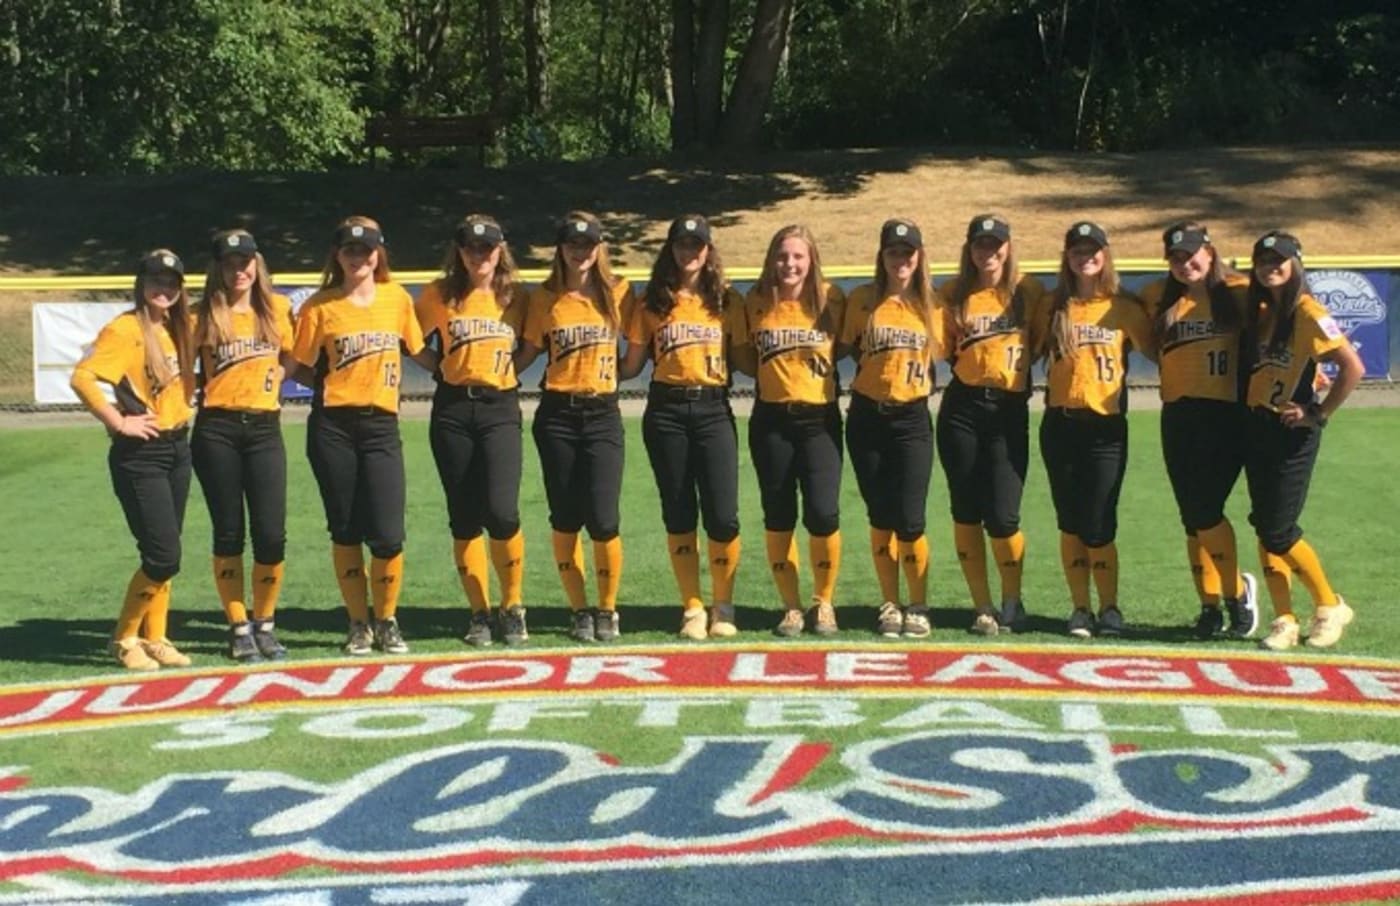 Girls Softball Team Disqualified From Tournament Over Obscene Snapchat